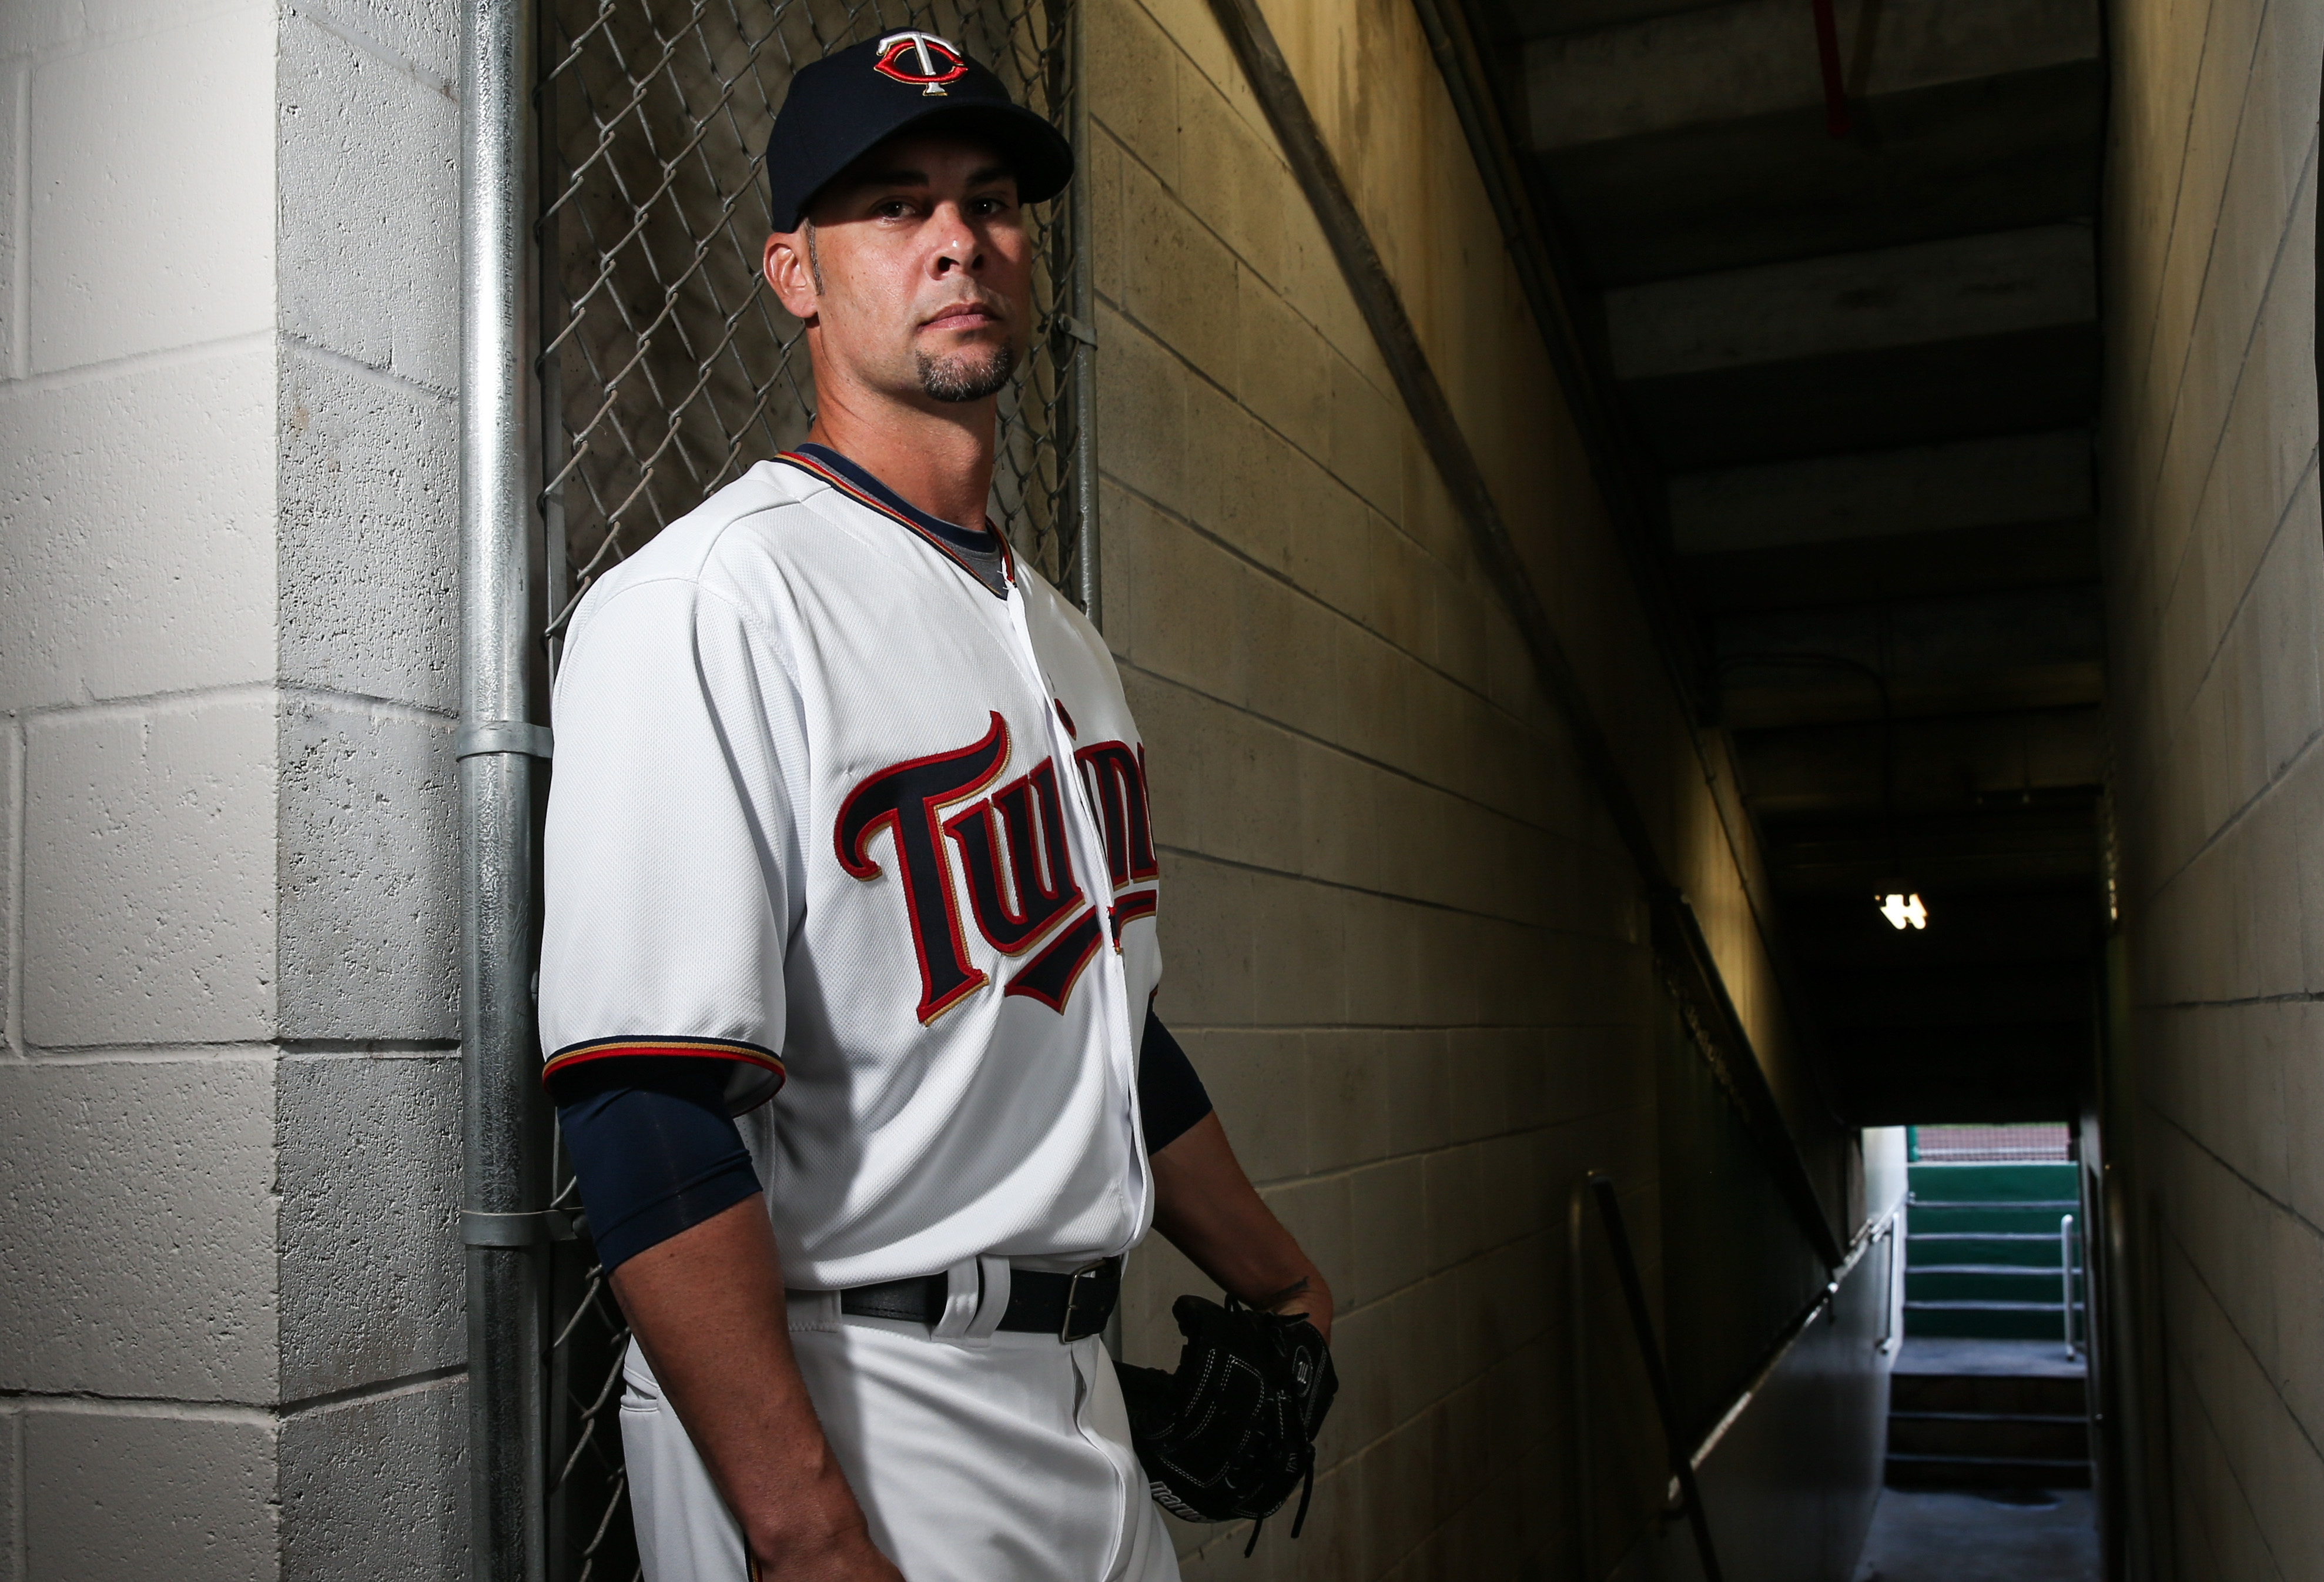 No, Ryan Vogelsong is not going to make the Twins roster